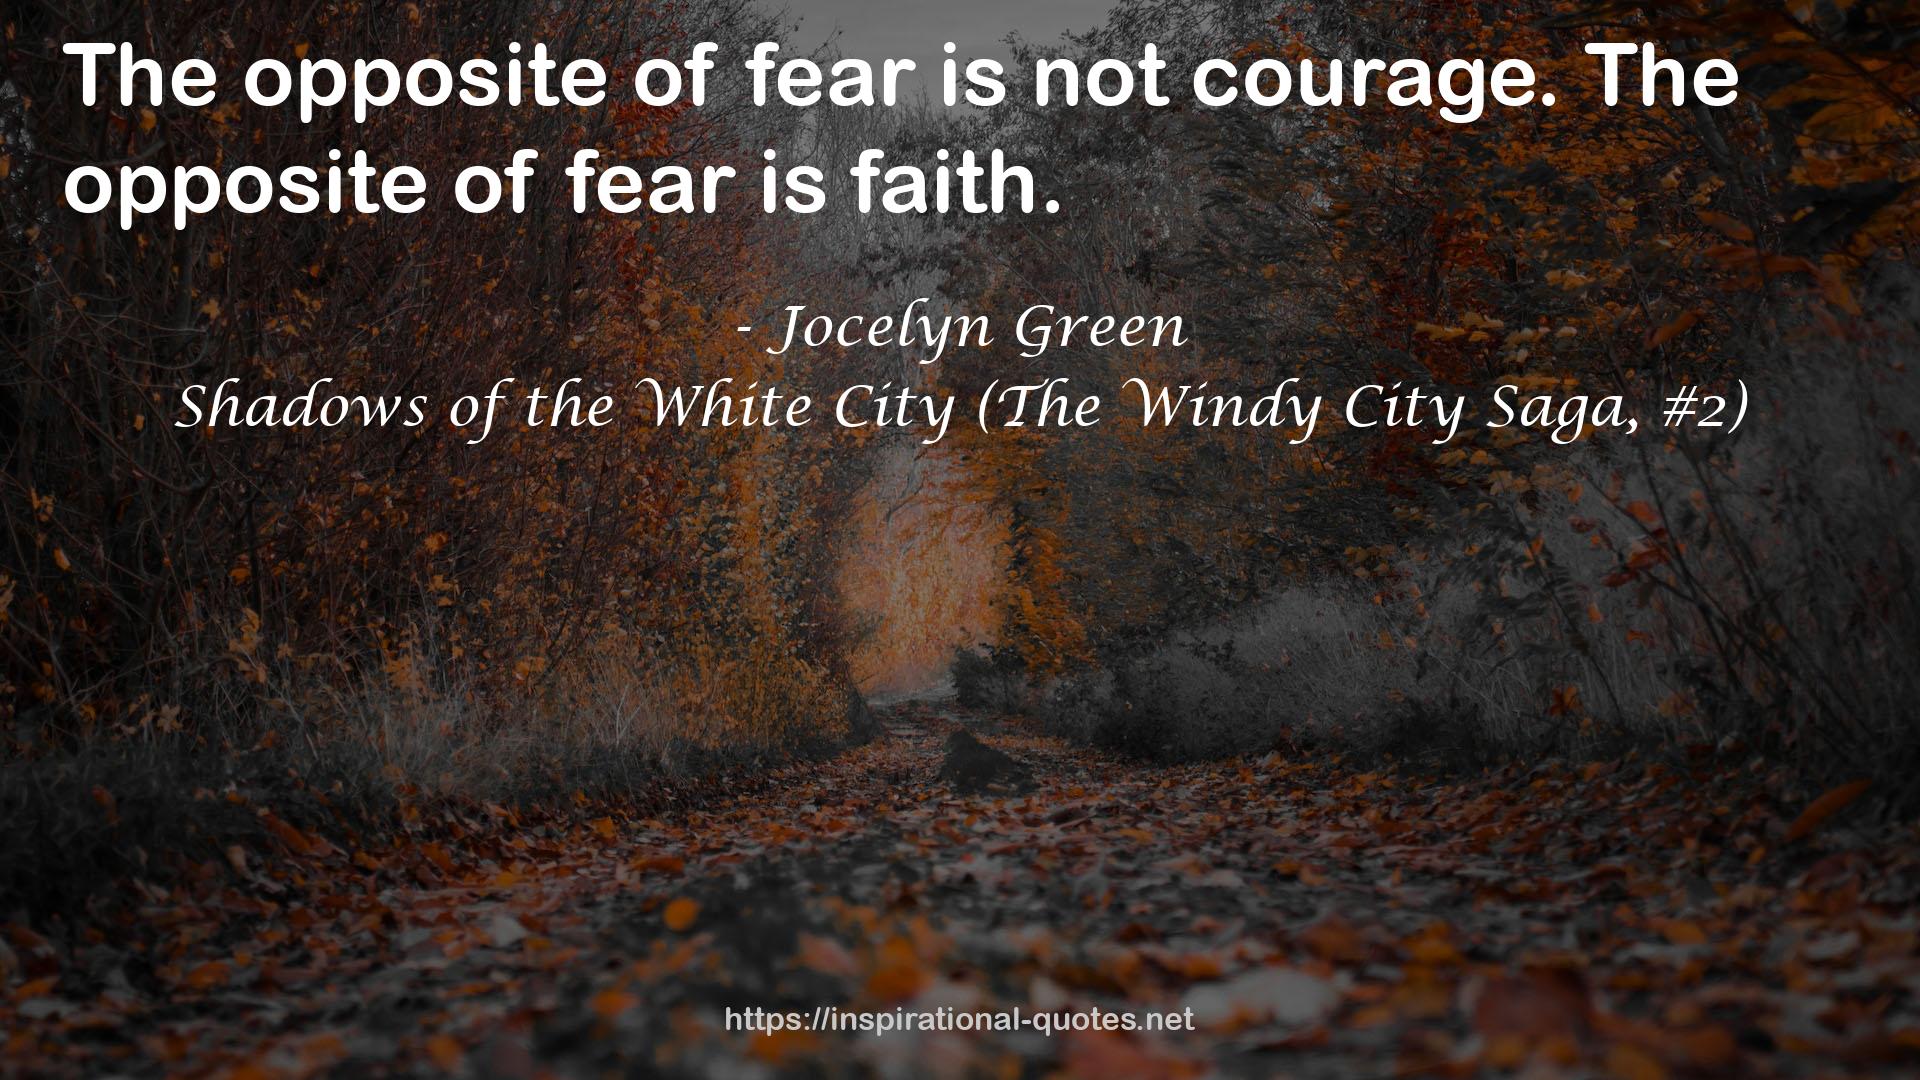 Shadows of the White City (The Windy City Saga, #2) QUOTES